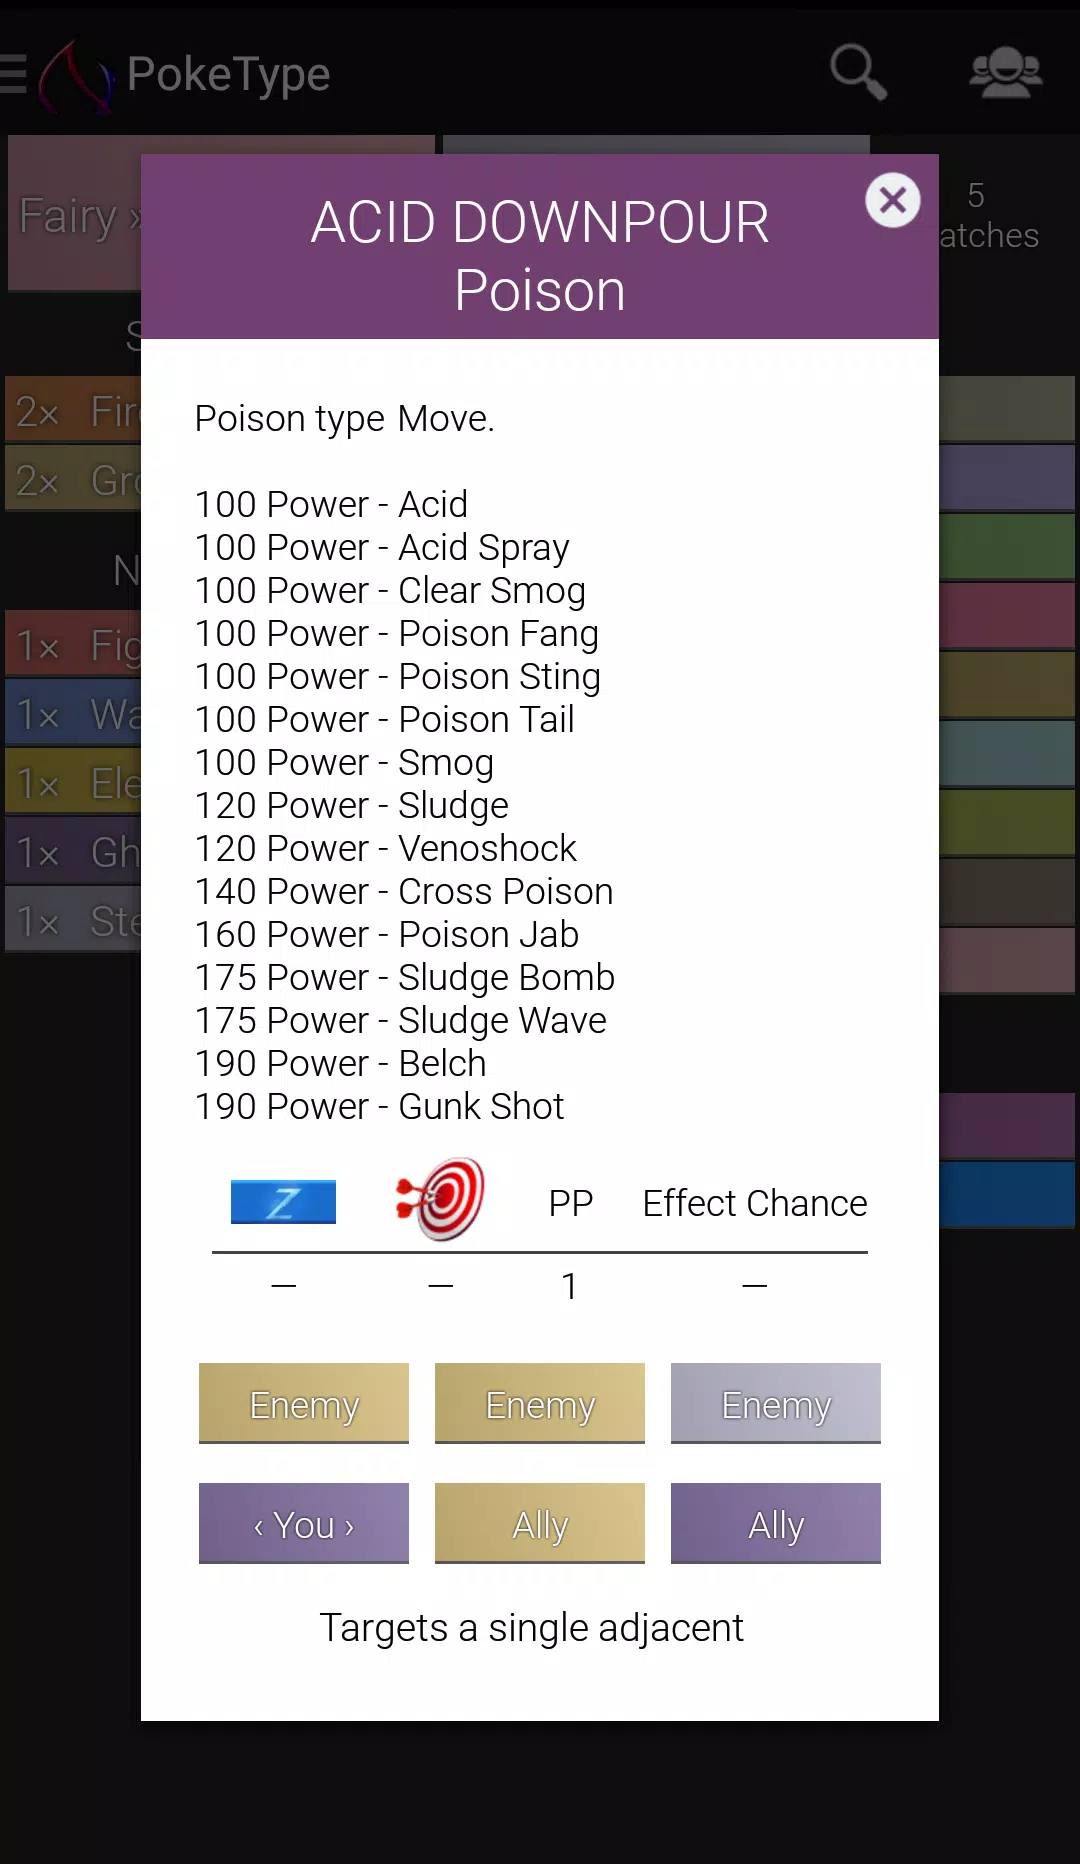 Type Chart for Pokemon APK for Android Download